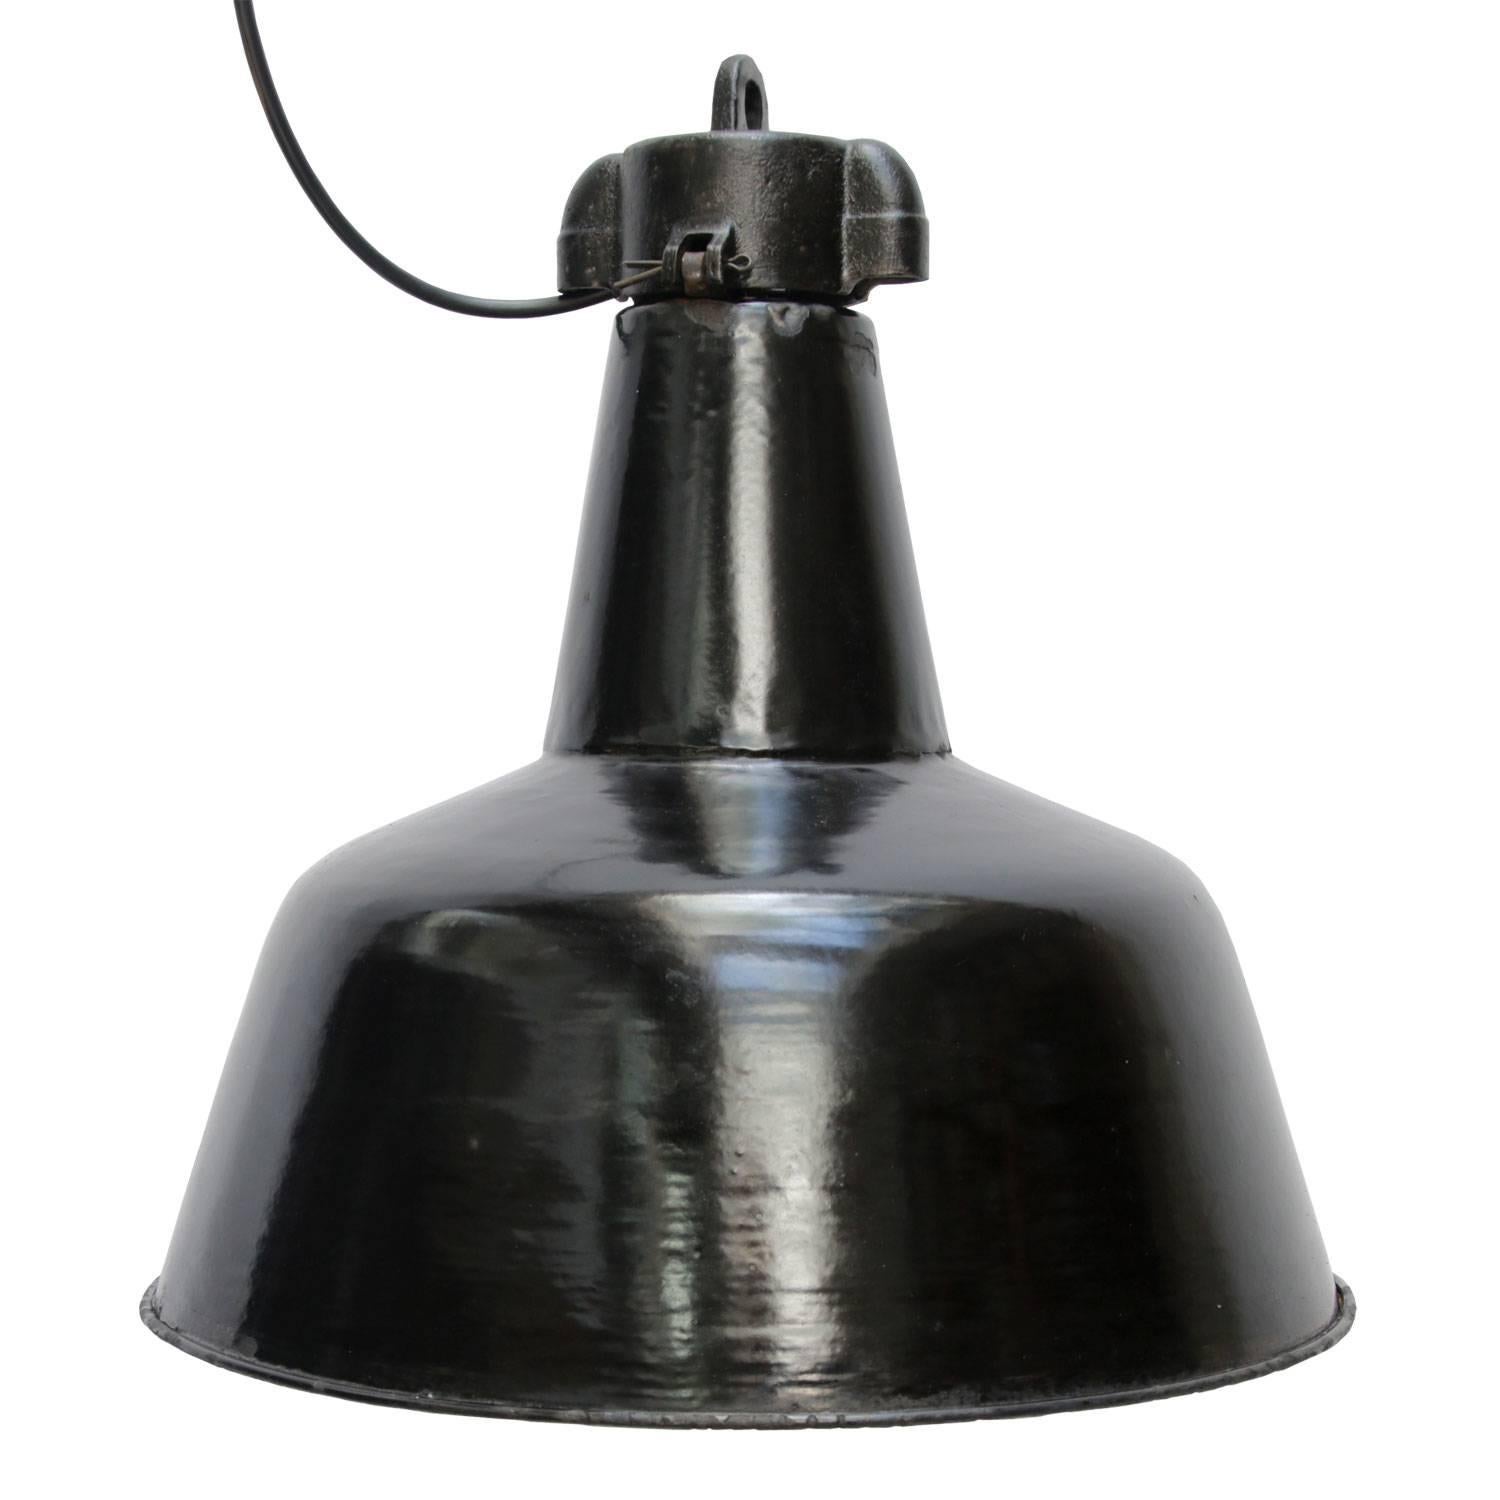 Industrial lamp black enamel. White interior cast. Iron top.

Measure: Weight 2.4 kg / 5.3 lb

Priced per individual item. All lamps have been made suitable by international standards for incandescent light bulbs, energy-efficient and LED bulbs.